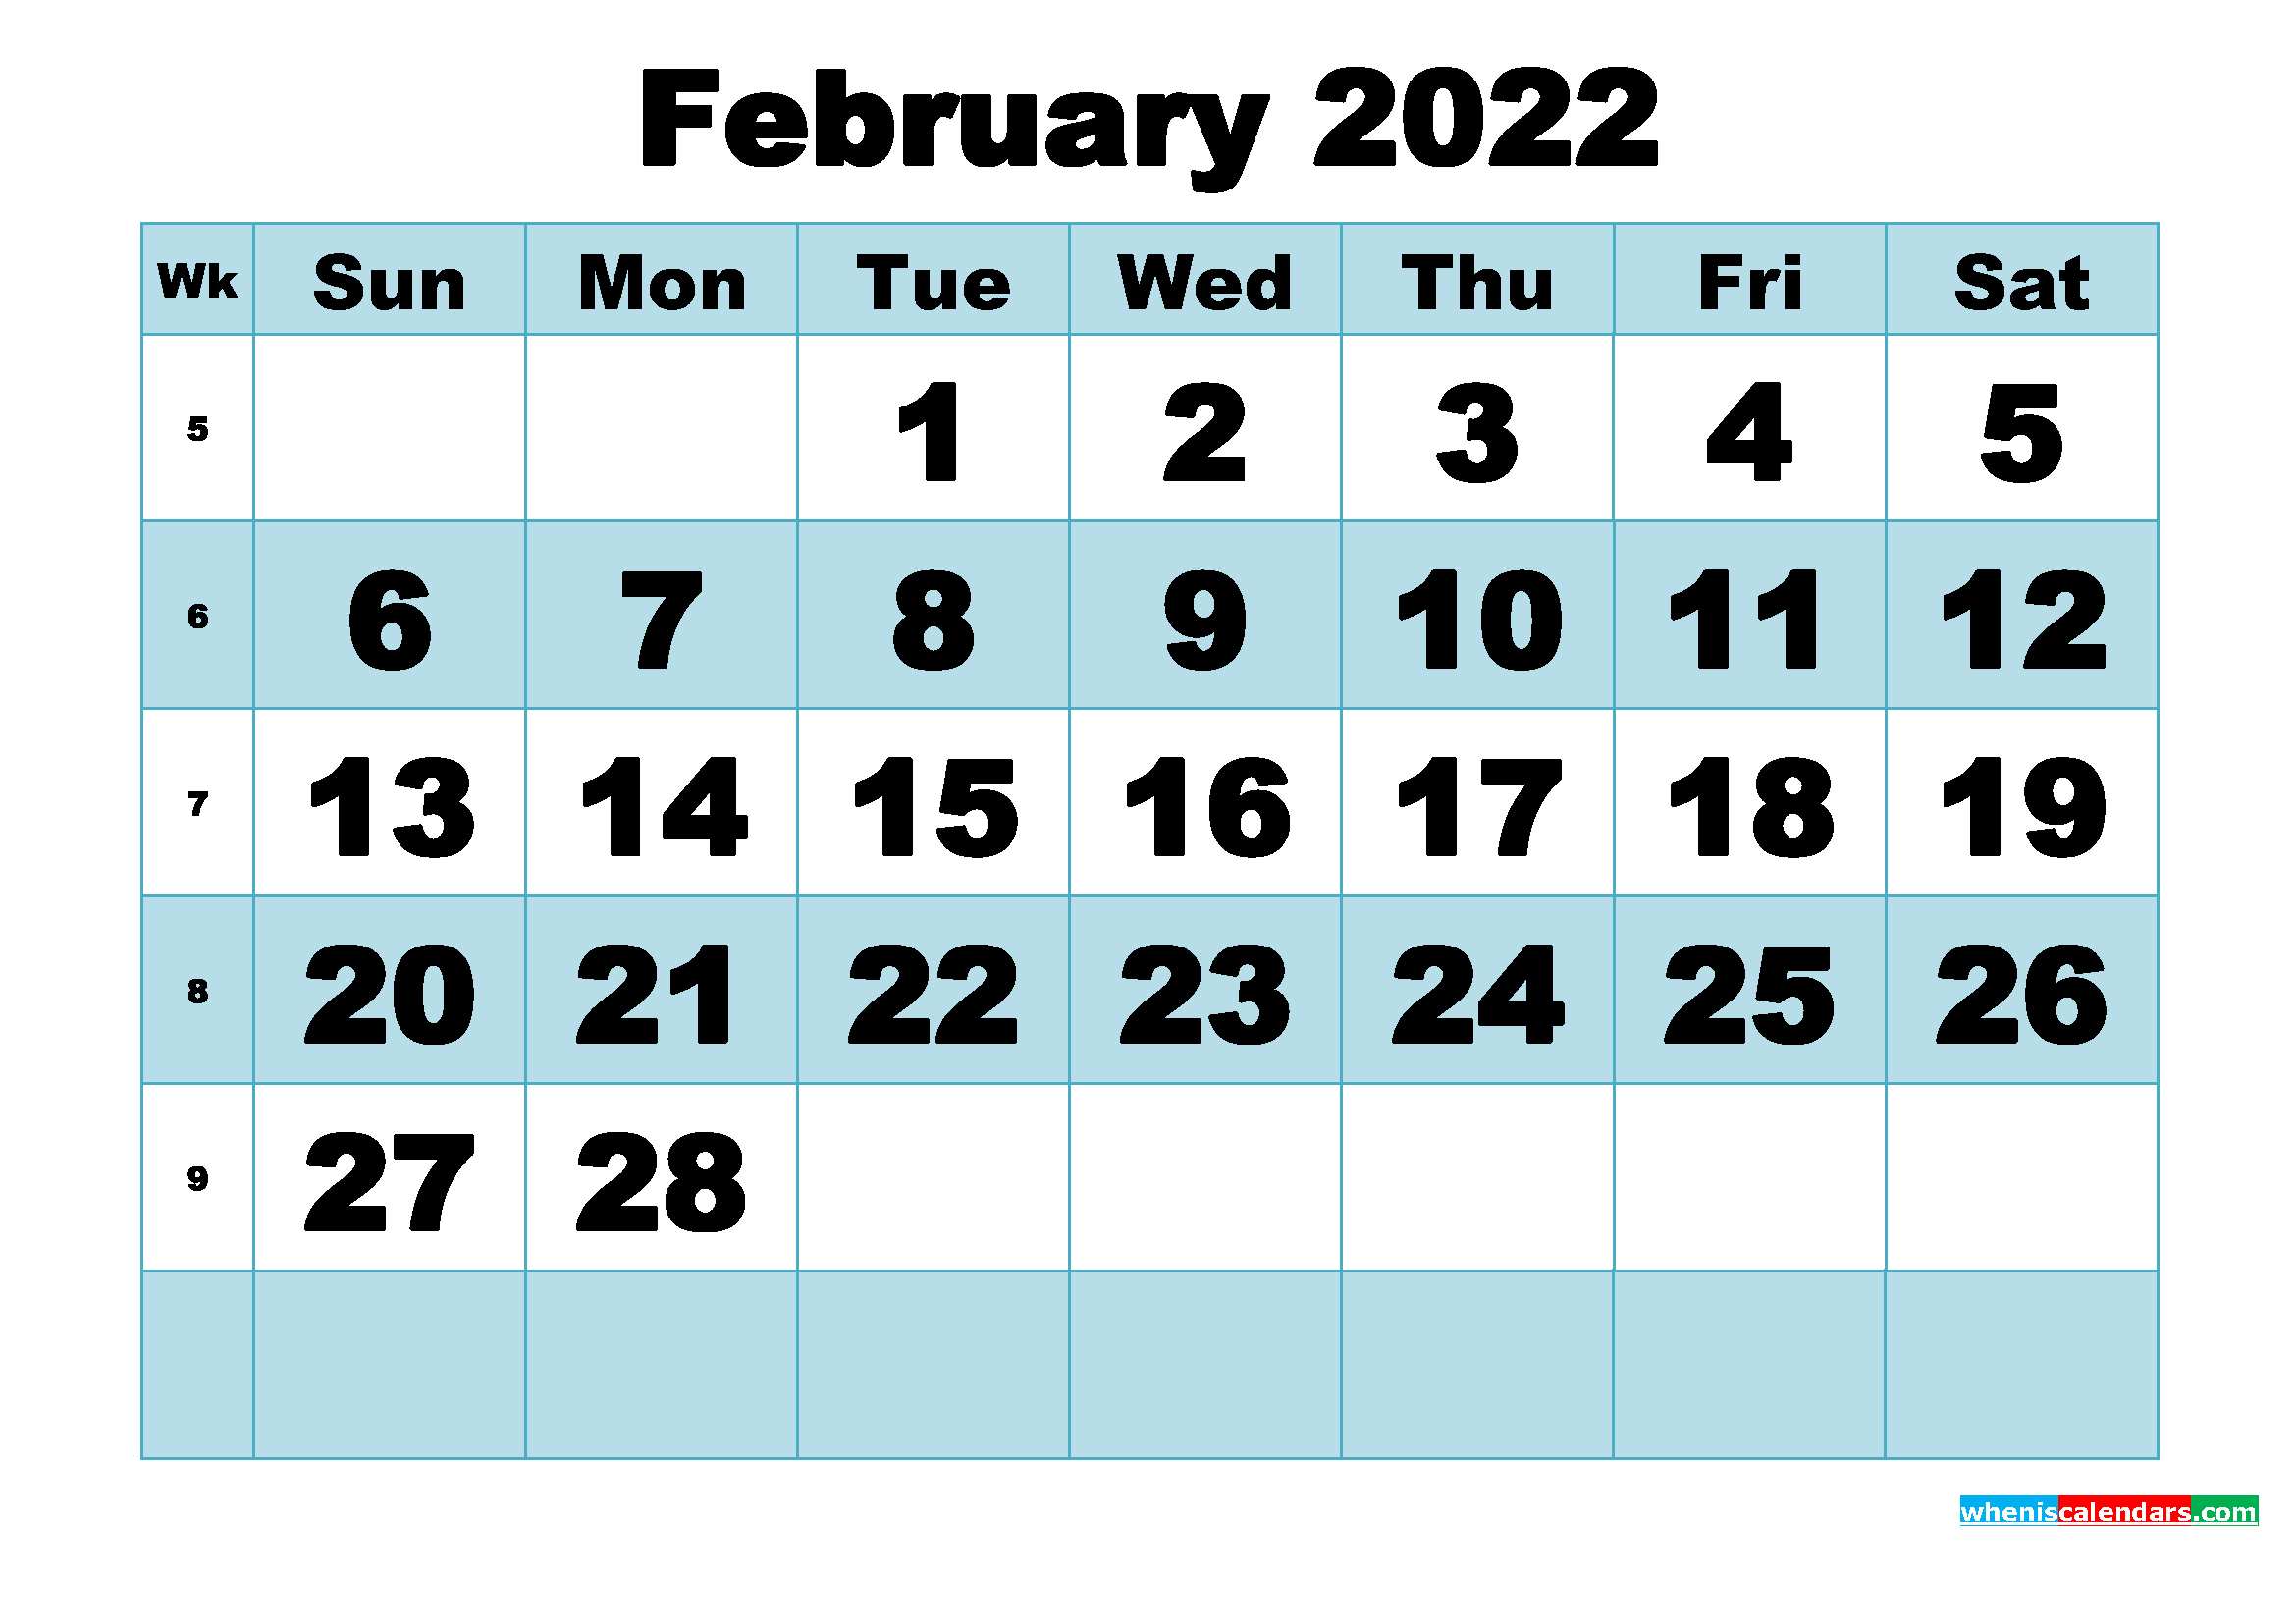 Free Printable February 2022 Calendar Word, Pdf, Image within Free 2022 Monthly Calendars That Are Printable